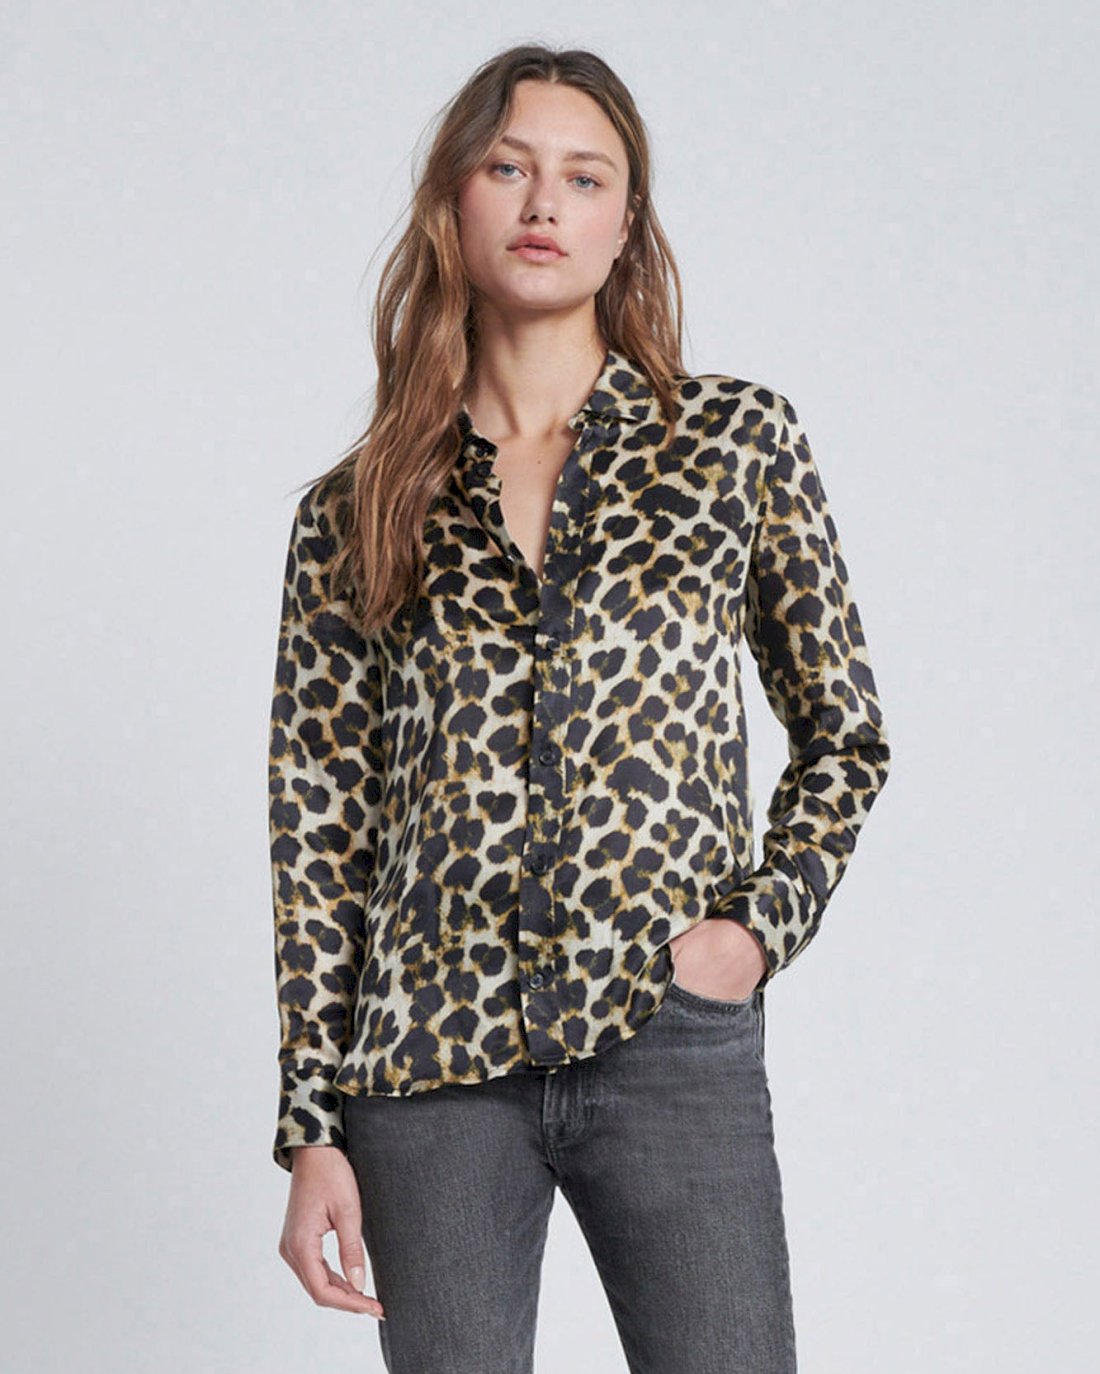 Silk Button-Up Shirt in Leopard | 7 For All Mankind